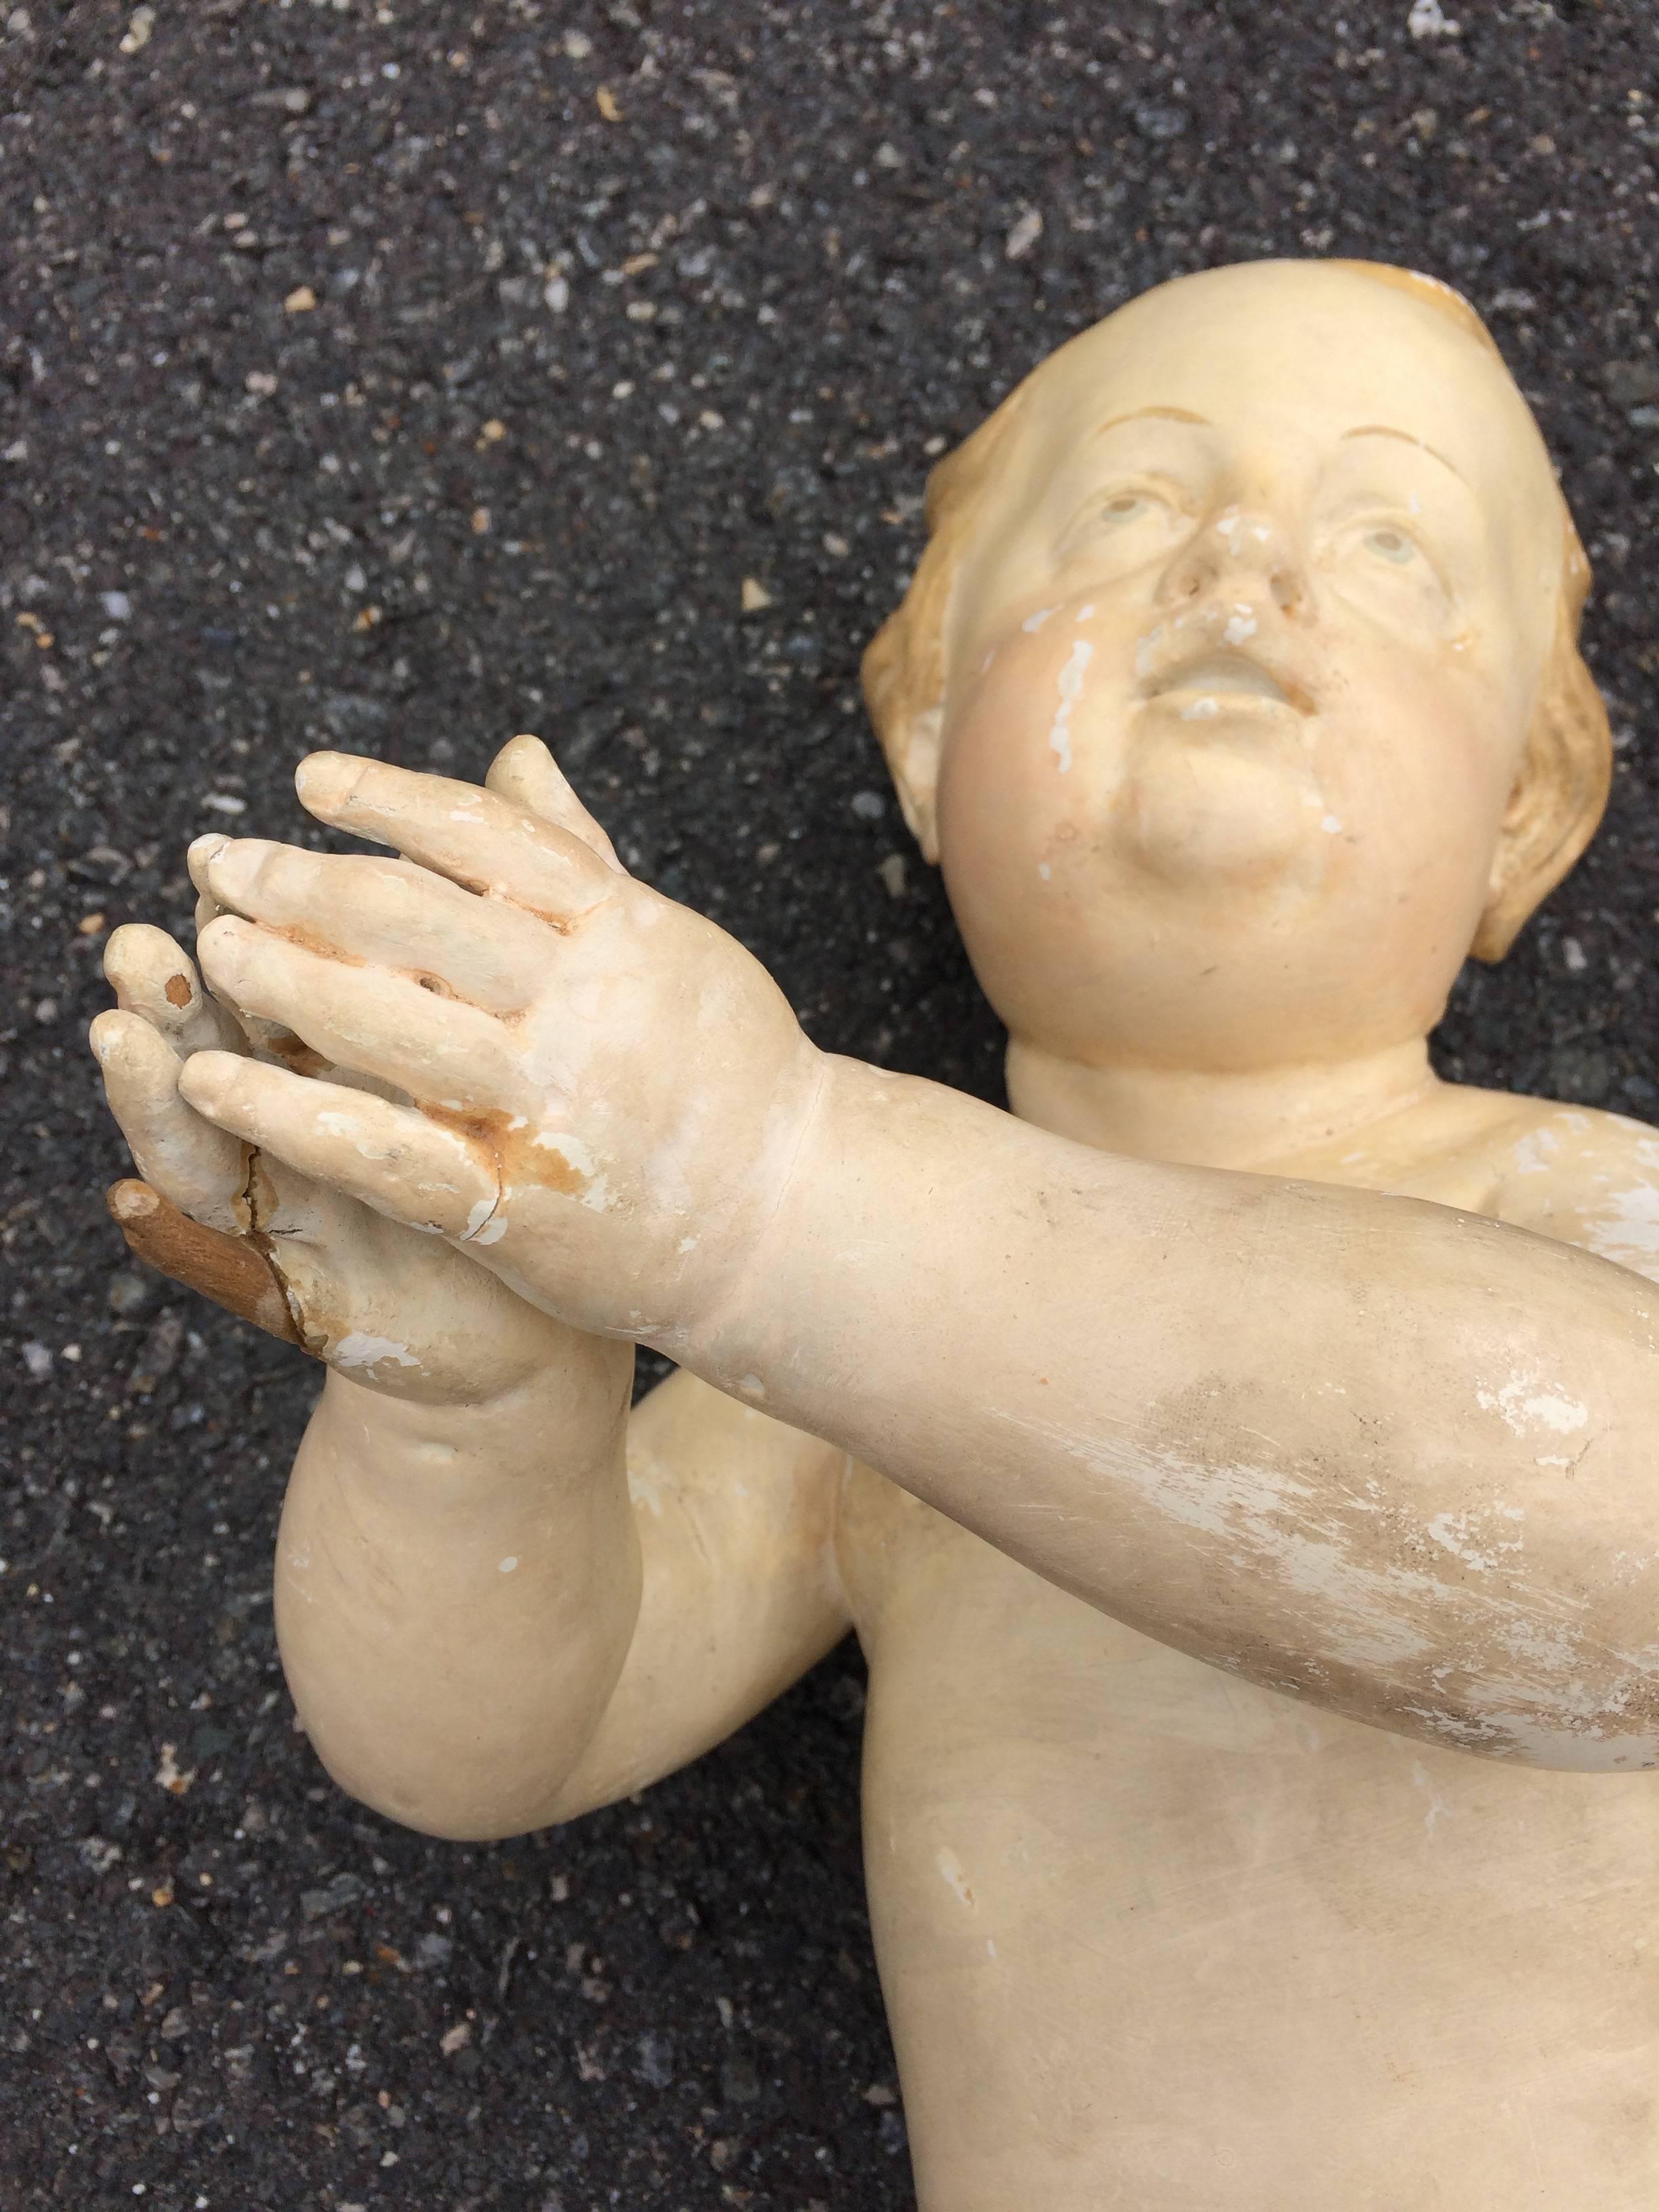 Beautiful life like carved wood and hand-painted plaster coated cherub, probably a religious artifact, origin unknown.